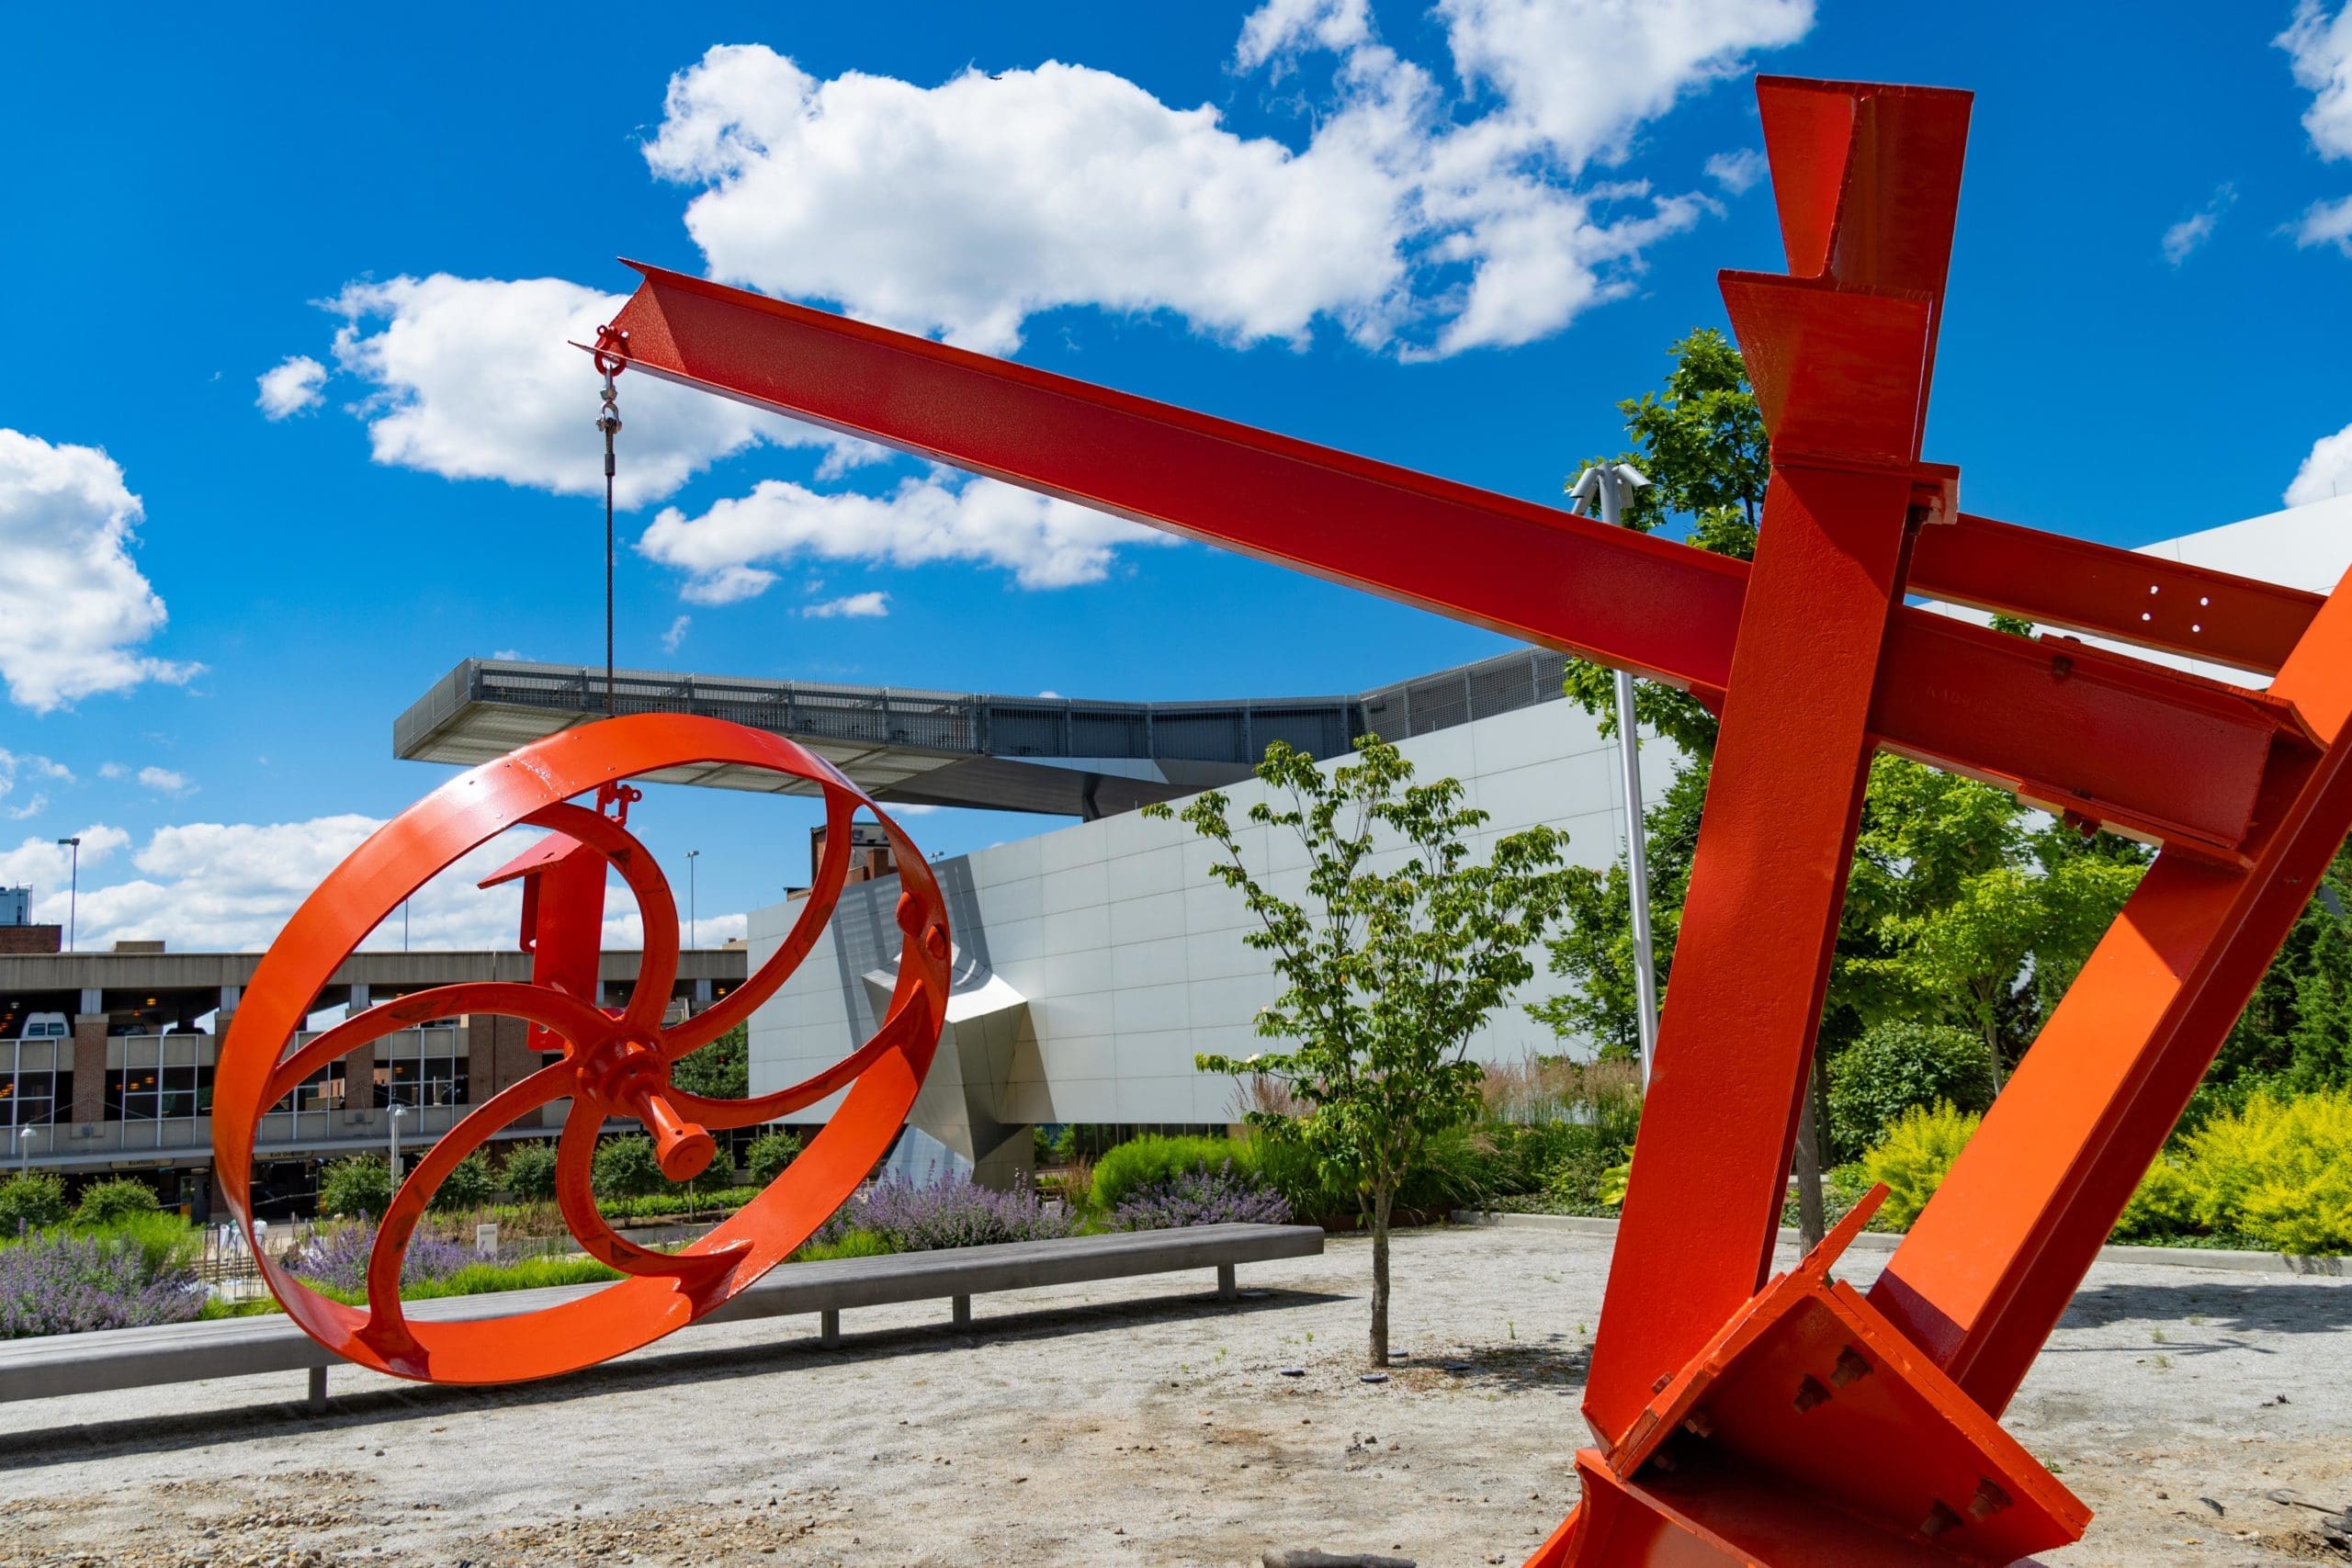 Eagle Wheel, Mark di Suvero, (Shanghai, China, 1933 - ), 1976-1979, Painted steel, 149 in. x 252 in. x 176 in. (378.46 cm x 640.08 cm x 447.04 cm), Purchased with funds from the National Endowment for the Arts, The Sisler McFawn Foundation, and the Museum Acquisition Fund, 1980.48